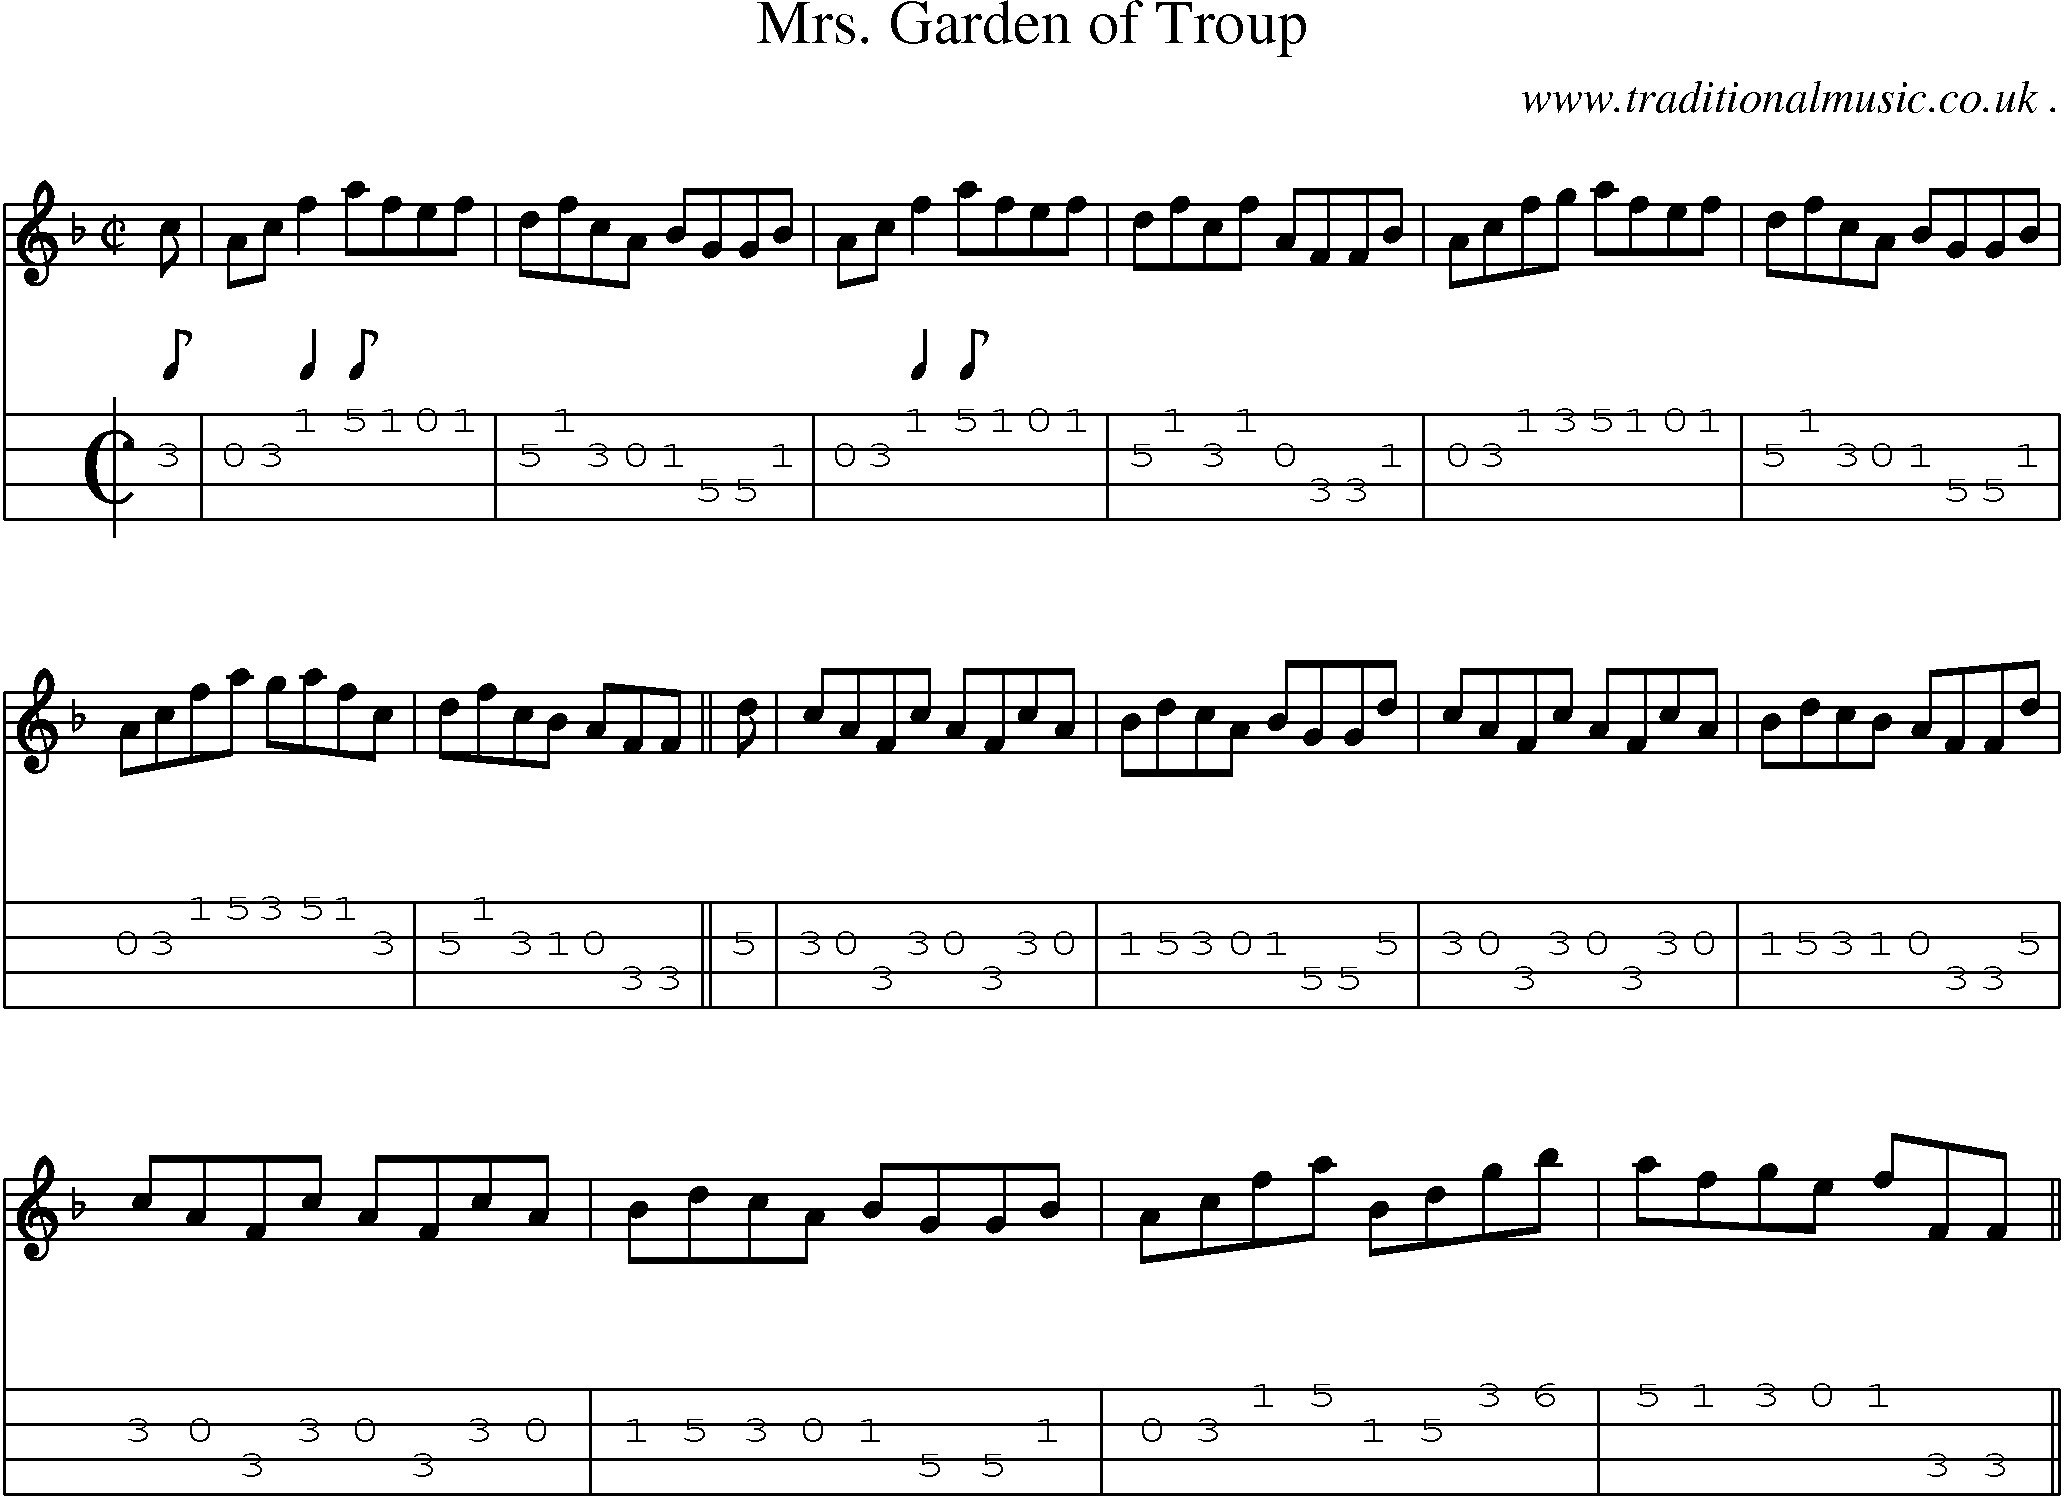 Sheet-music  score, Chords and Mandolin Tabs for Mrs Garden Of Troup